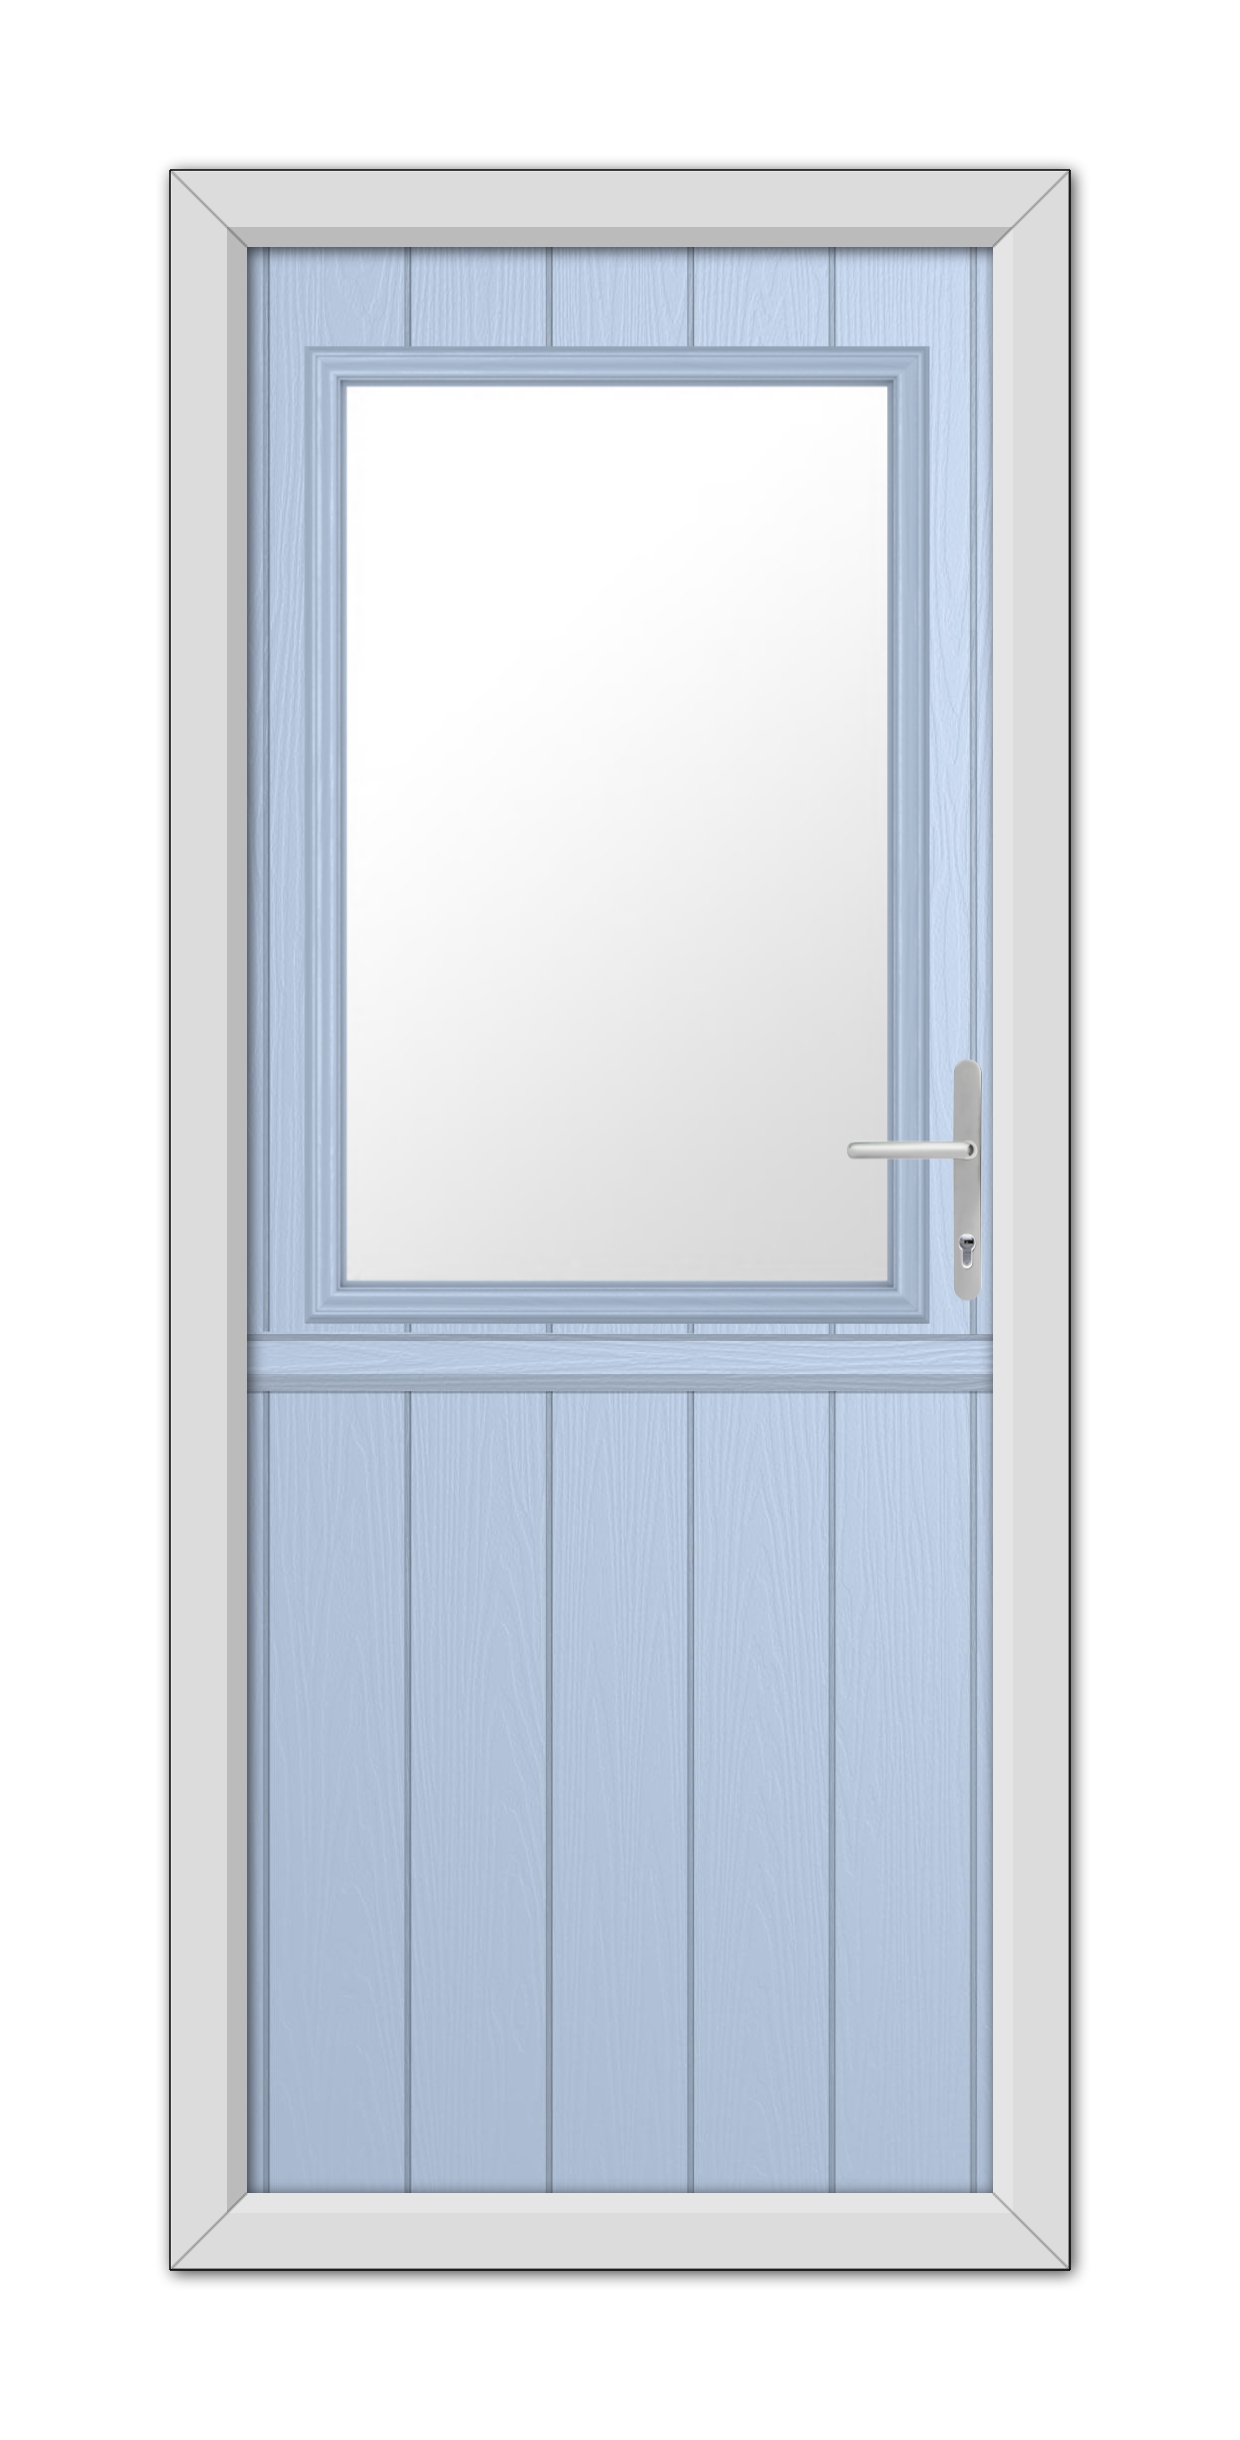 A closed Duck Egg Blue Clifton Stable Composite Door featuring a centered rectangular window with a white frame and a handle on the right side.